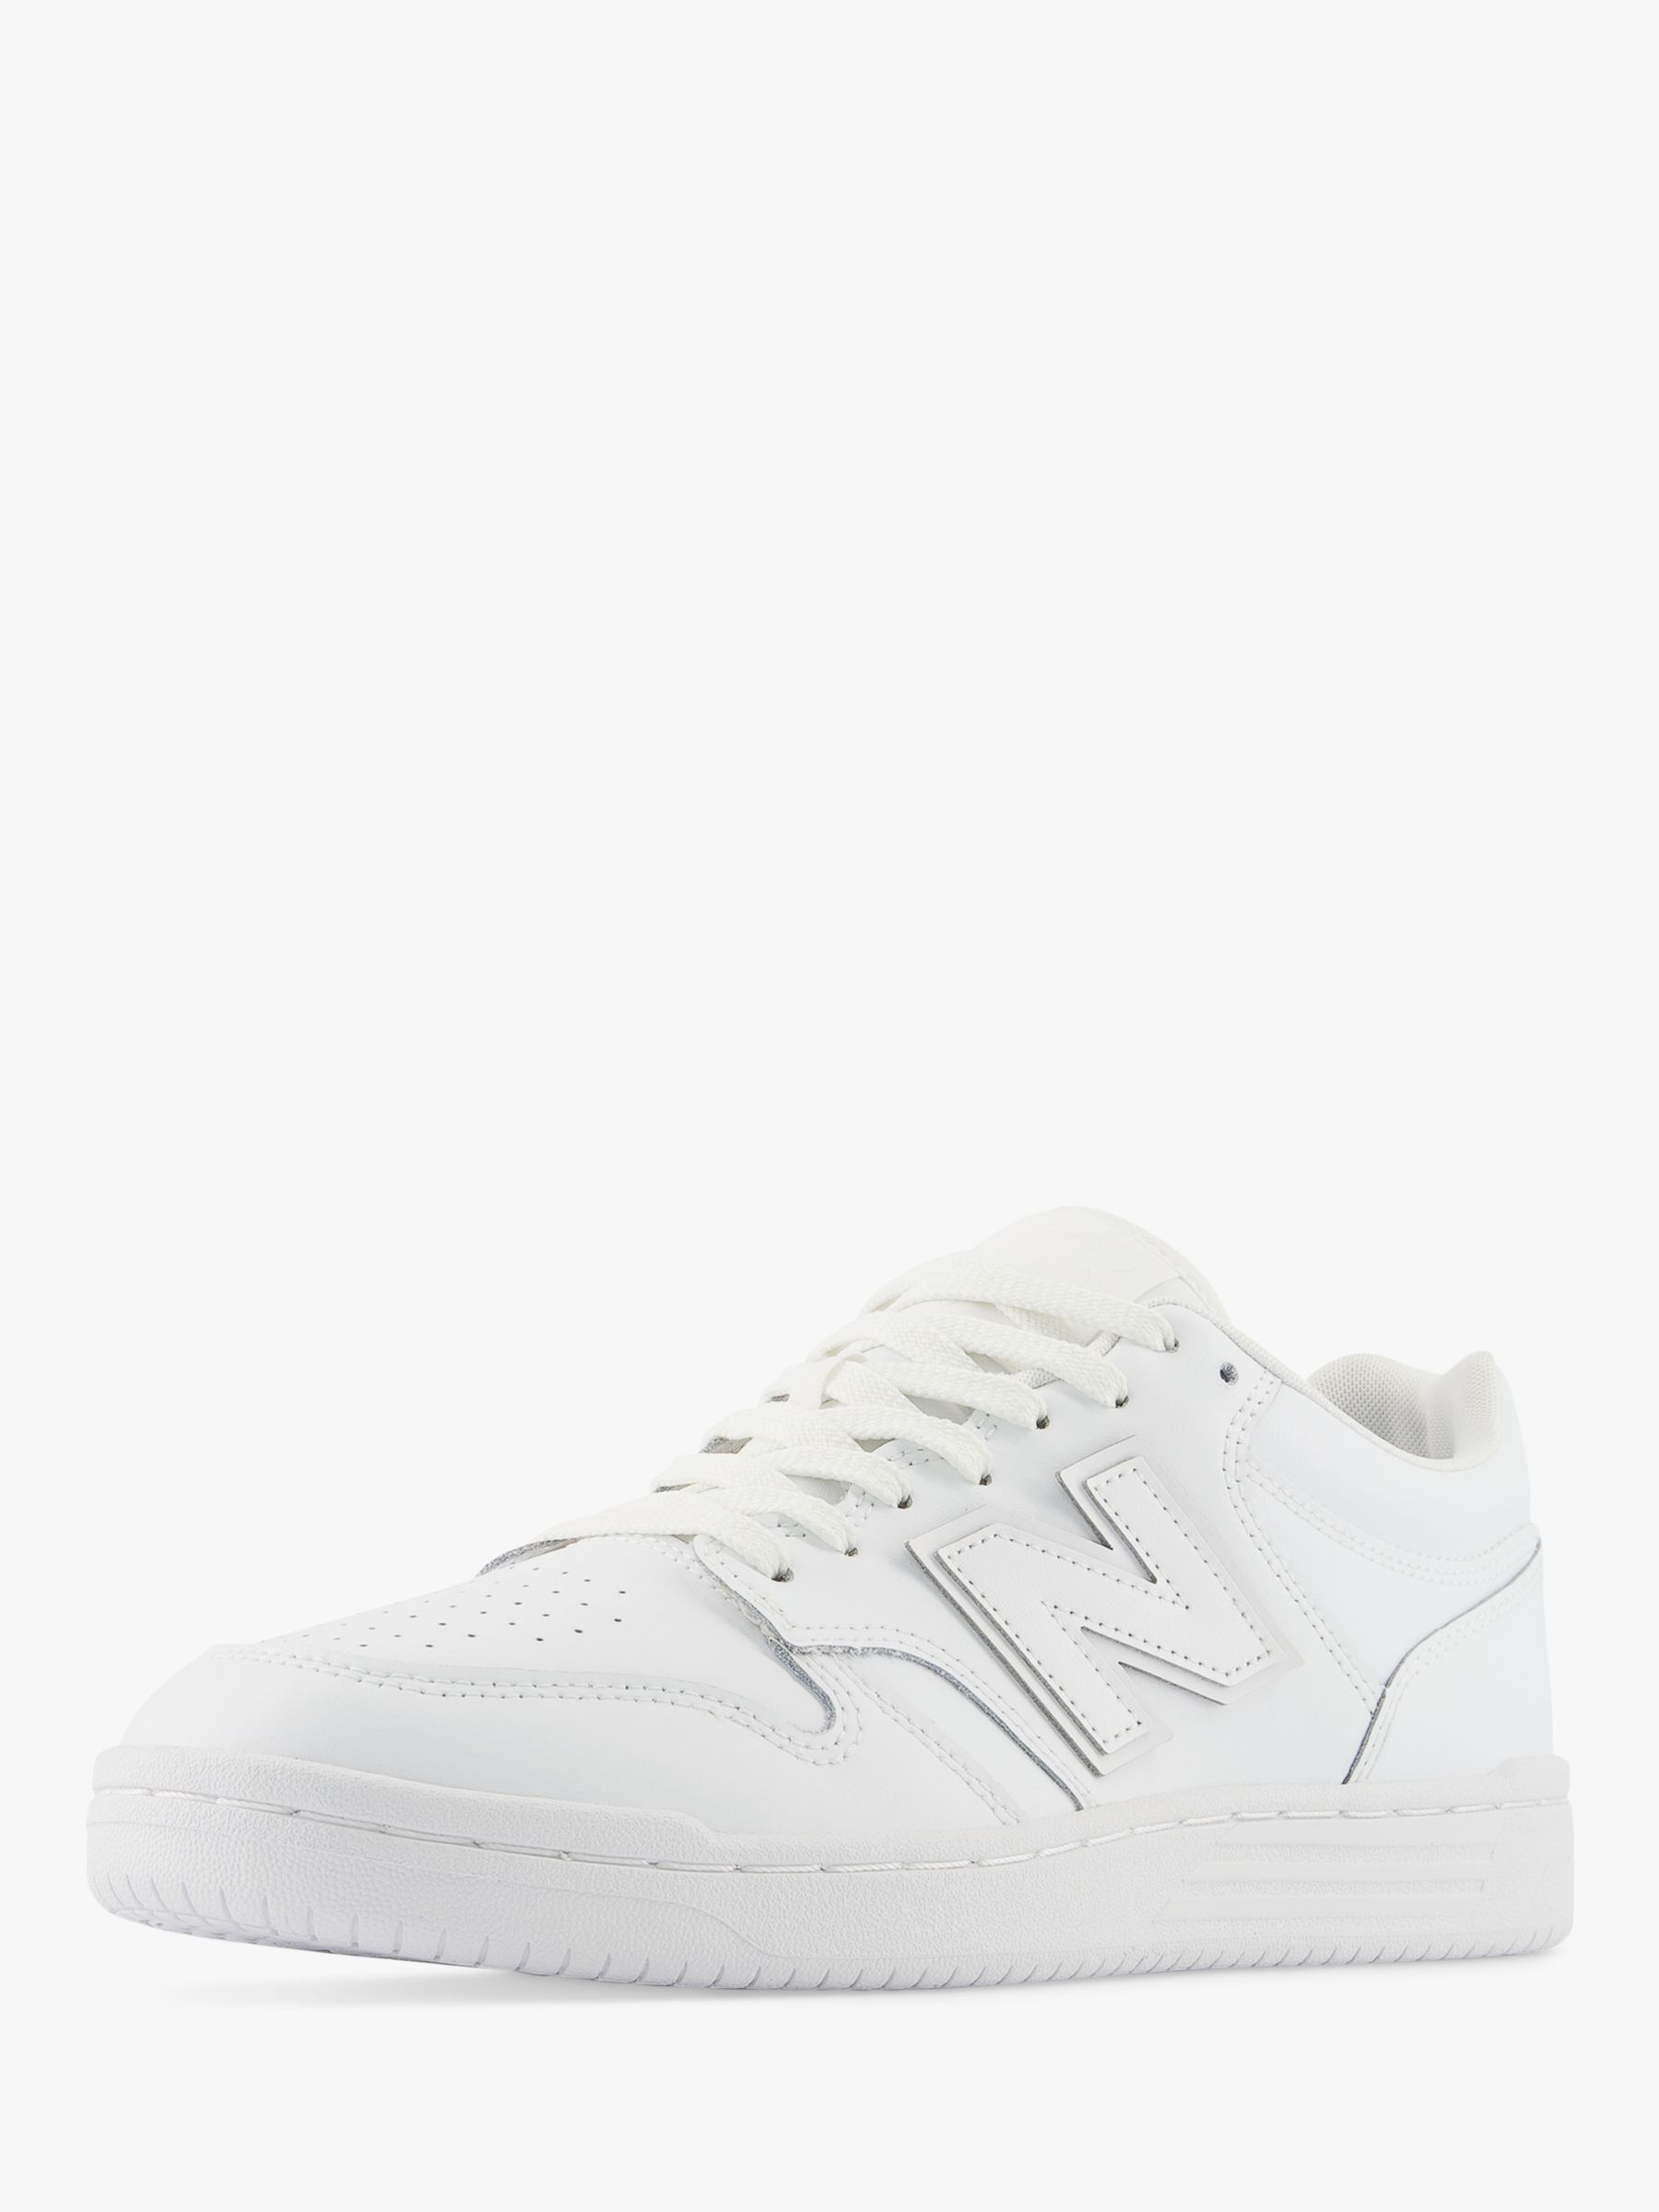 New Balance 480 Leather Lace Up Trainers, White at John Lewis & Partners